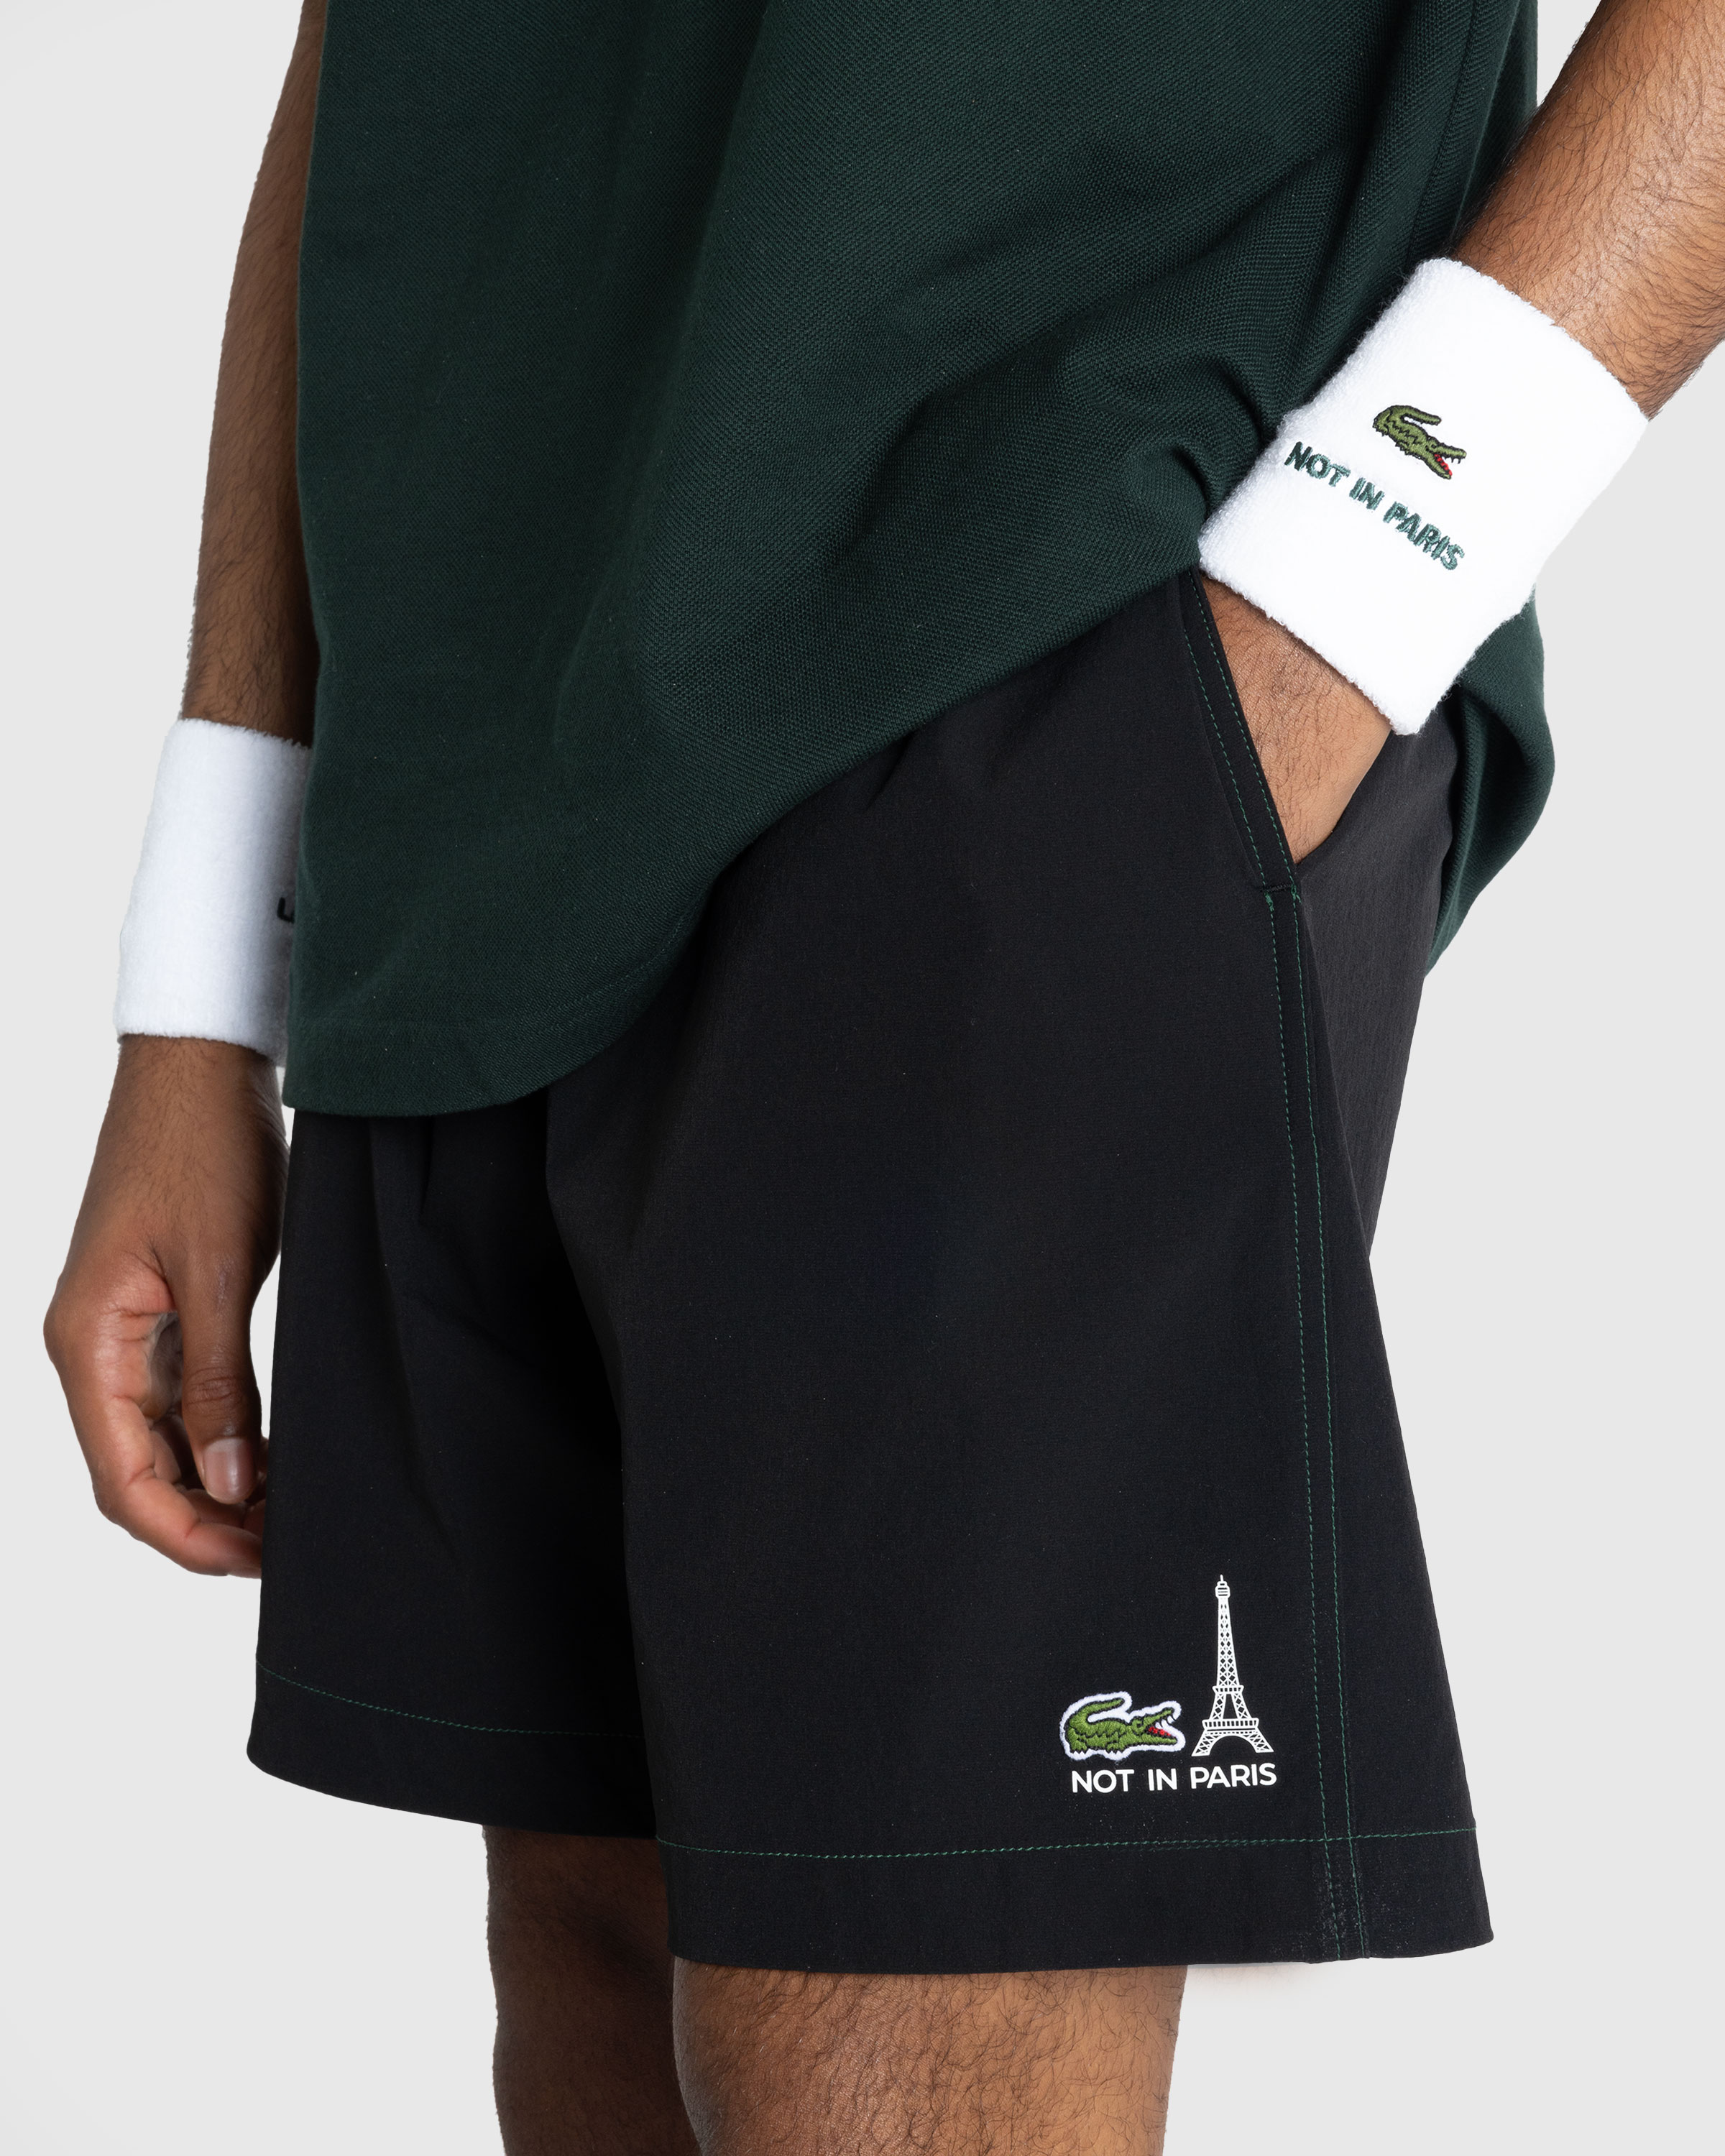 Lacoste x Highsnobiety – Not In Paris Tennis Shorts Black - Active Shorts - Sinople - Image 6